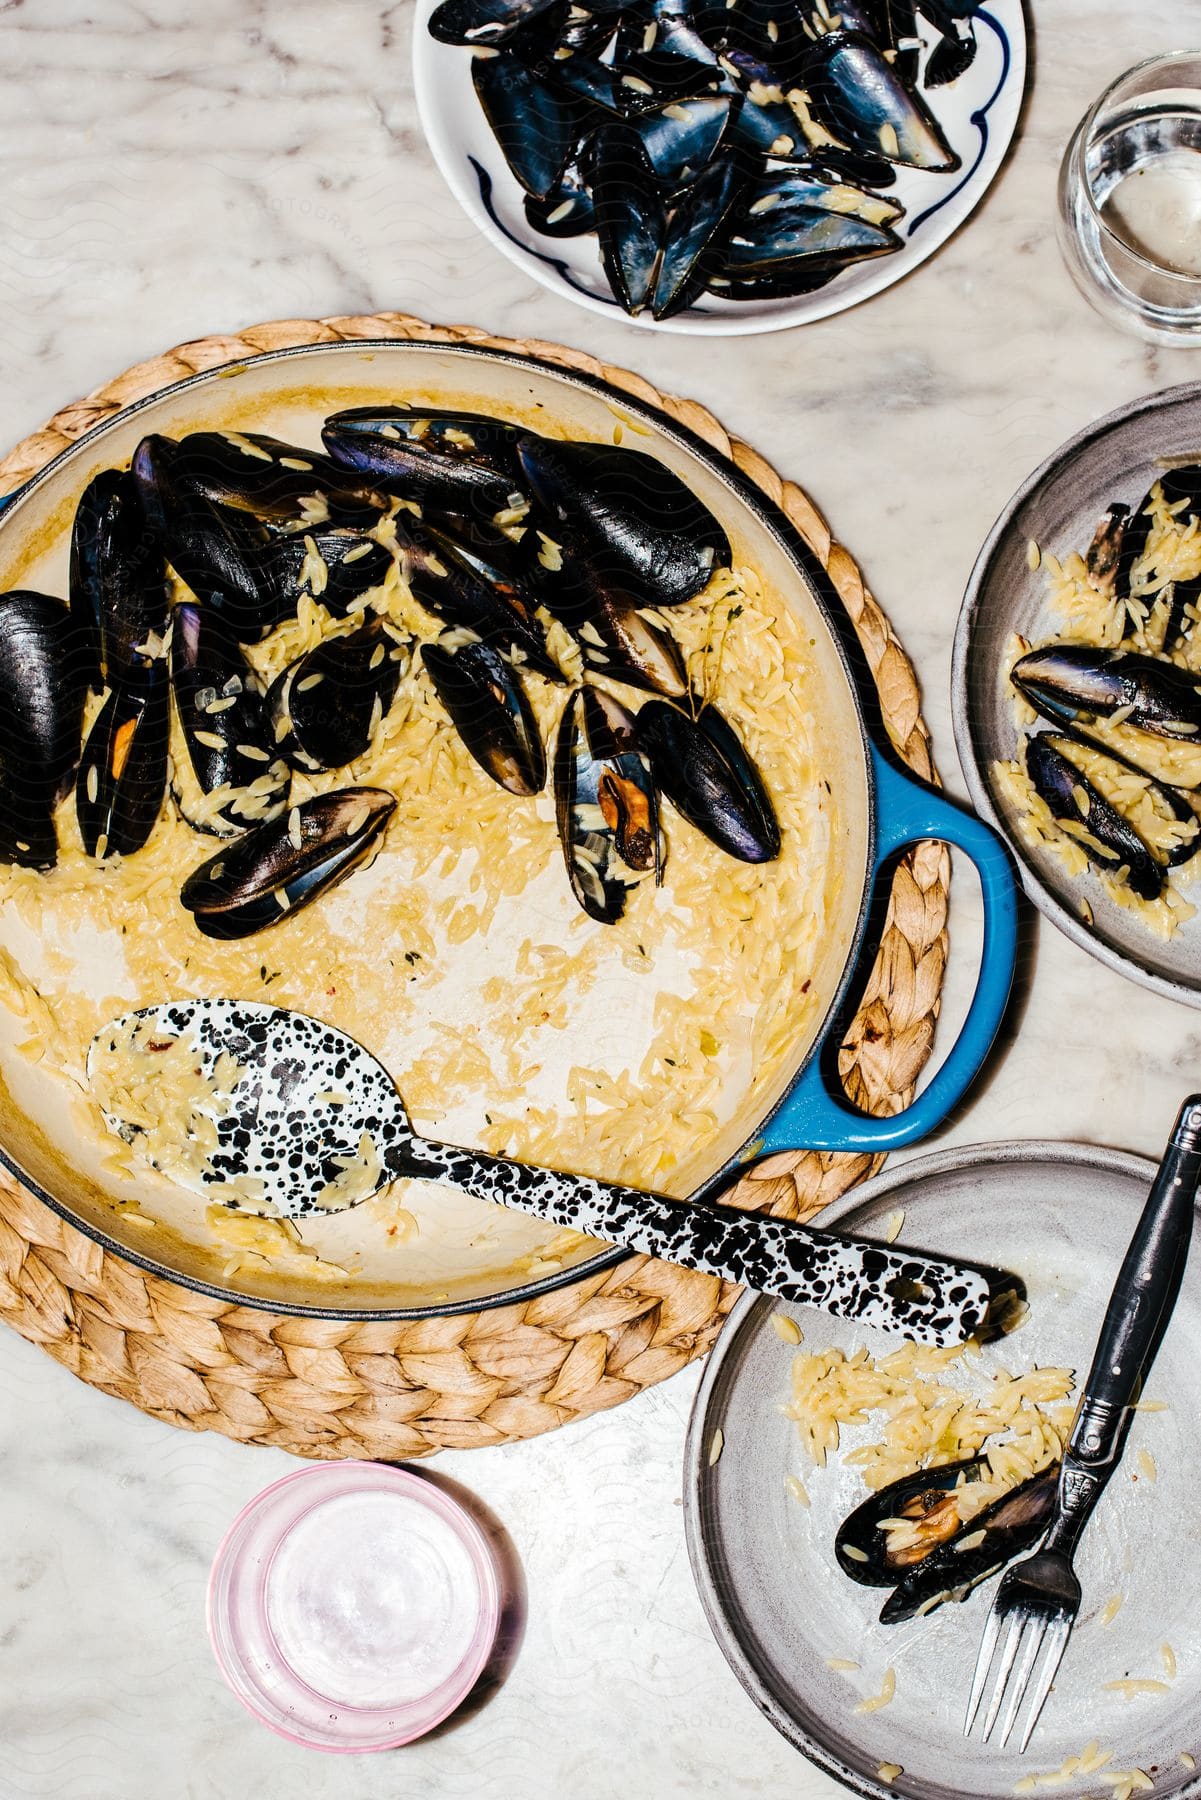 Stanbuli Mussels and rice on display